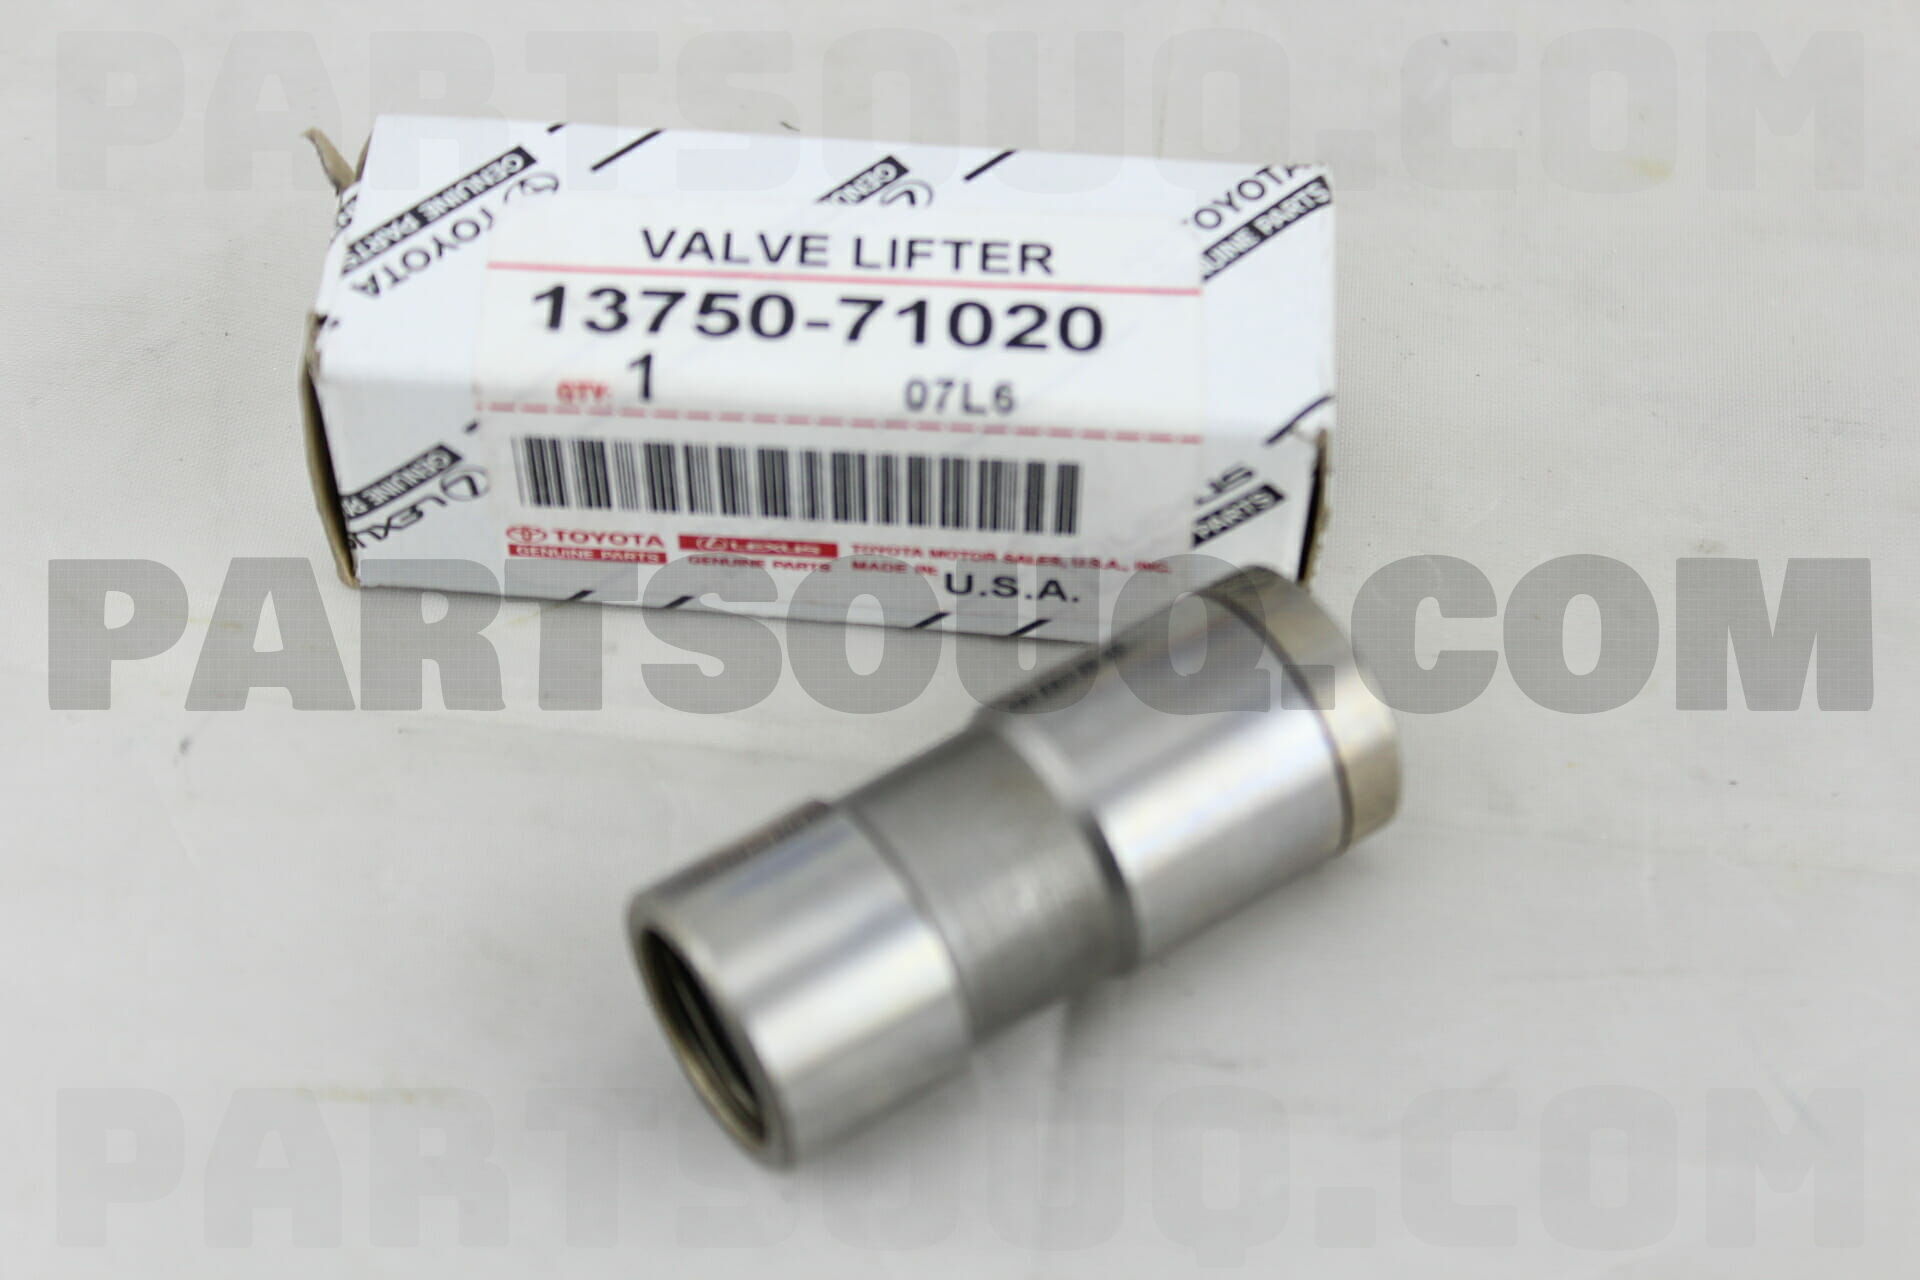 13750-71020 = 13750-76004-71 = 02/920083 LIFTER VALVE FOR TOYOTA 4Y ENGINE 